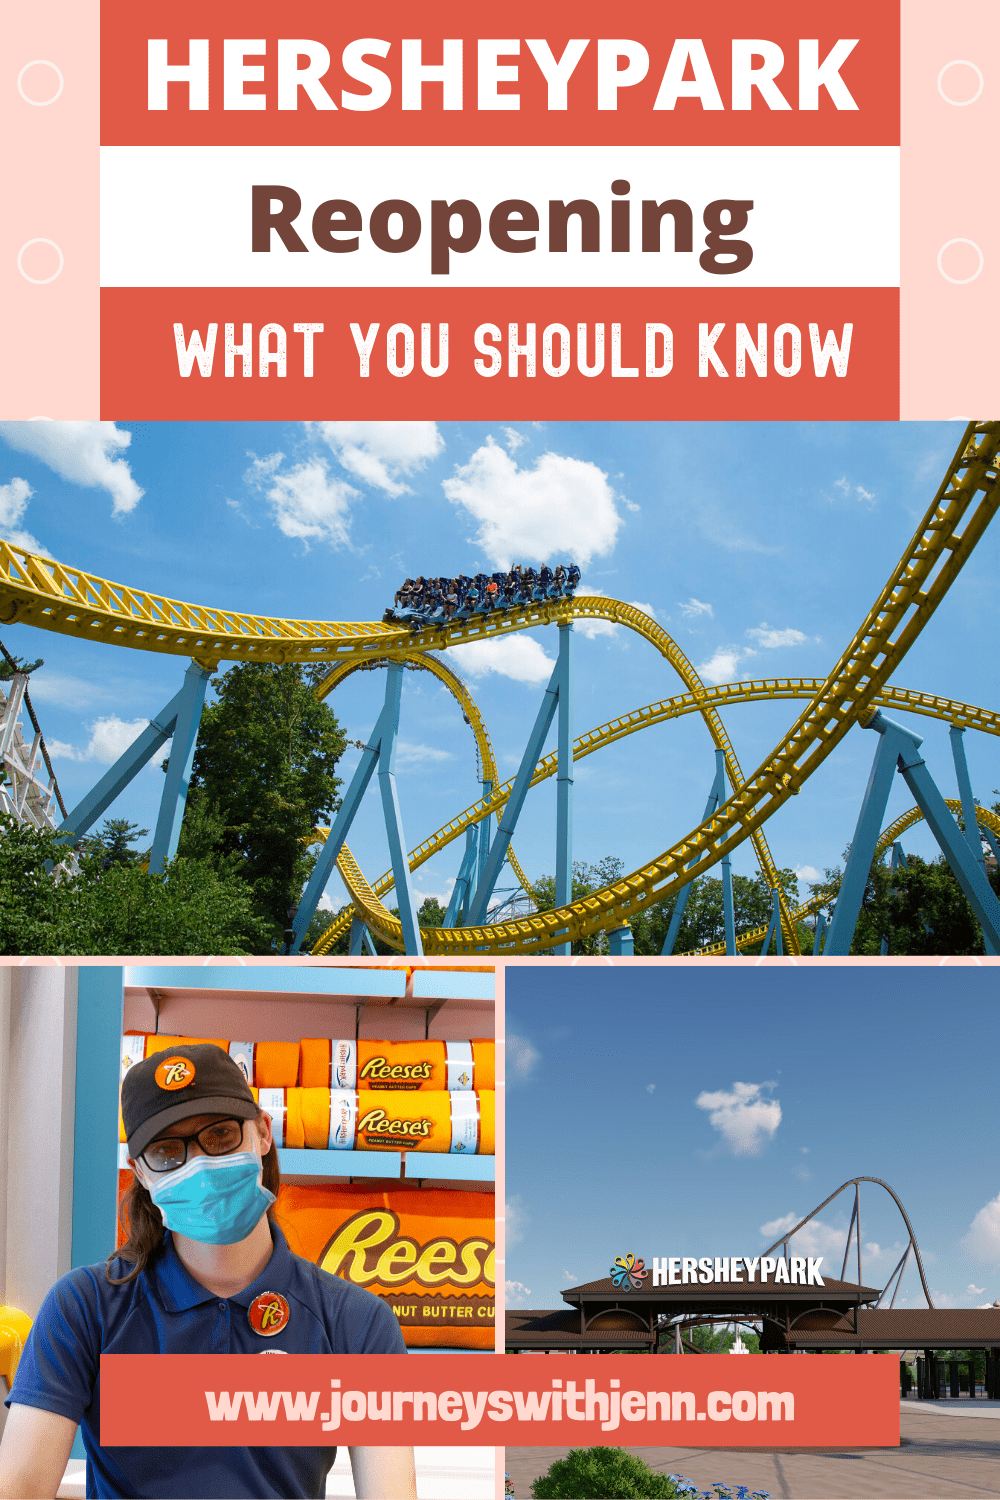 Hersheypark Reopening July 3 What To Expect Journeys with Jenn